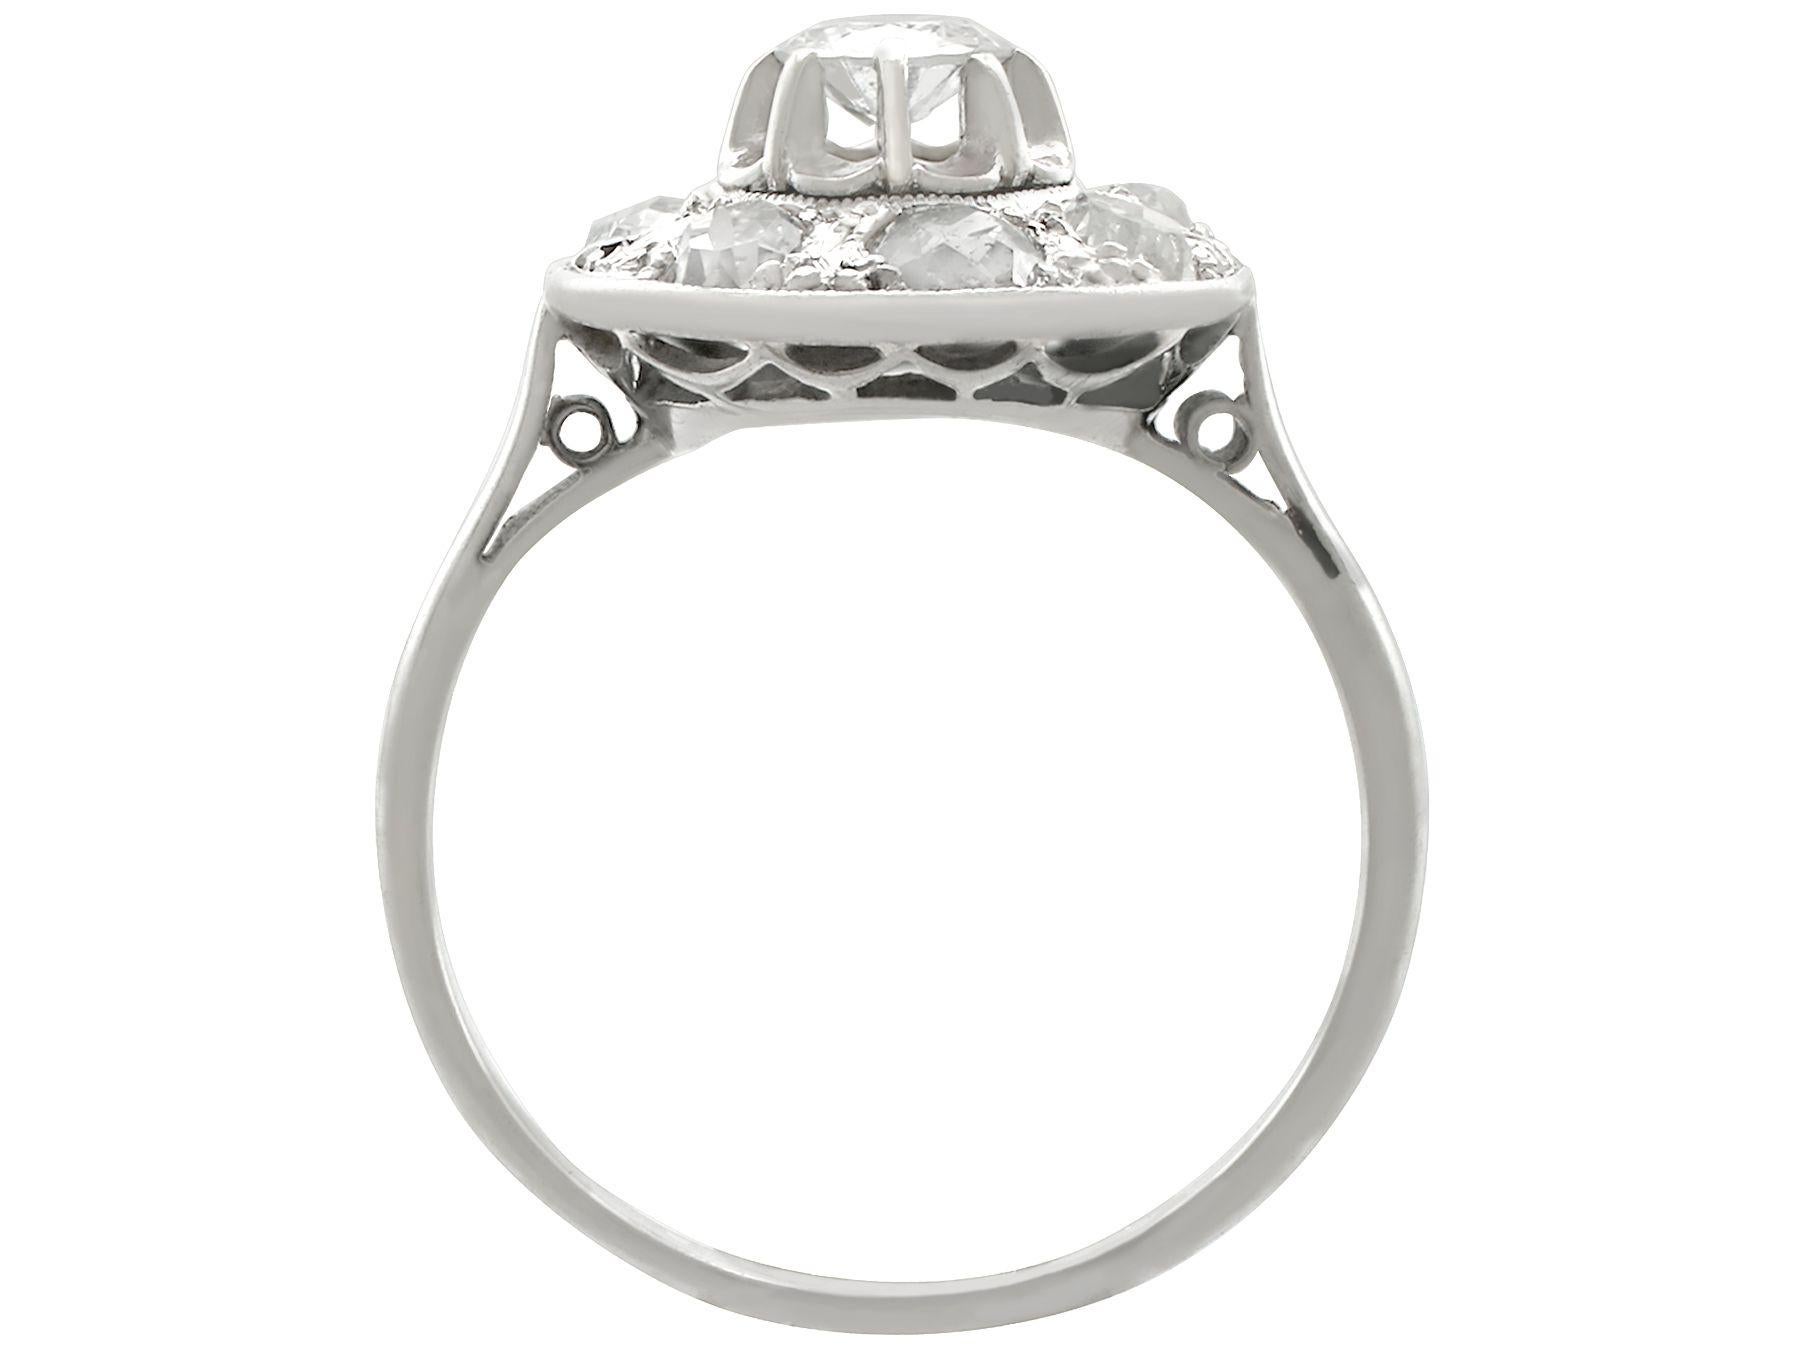 Women's Antique French Diamond and White Gold Cocktail Ring